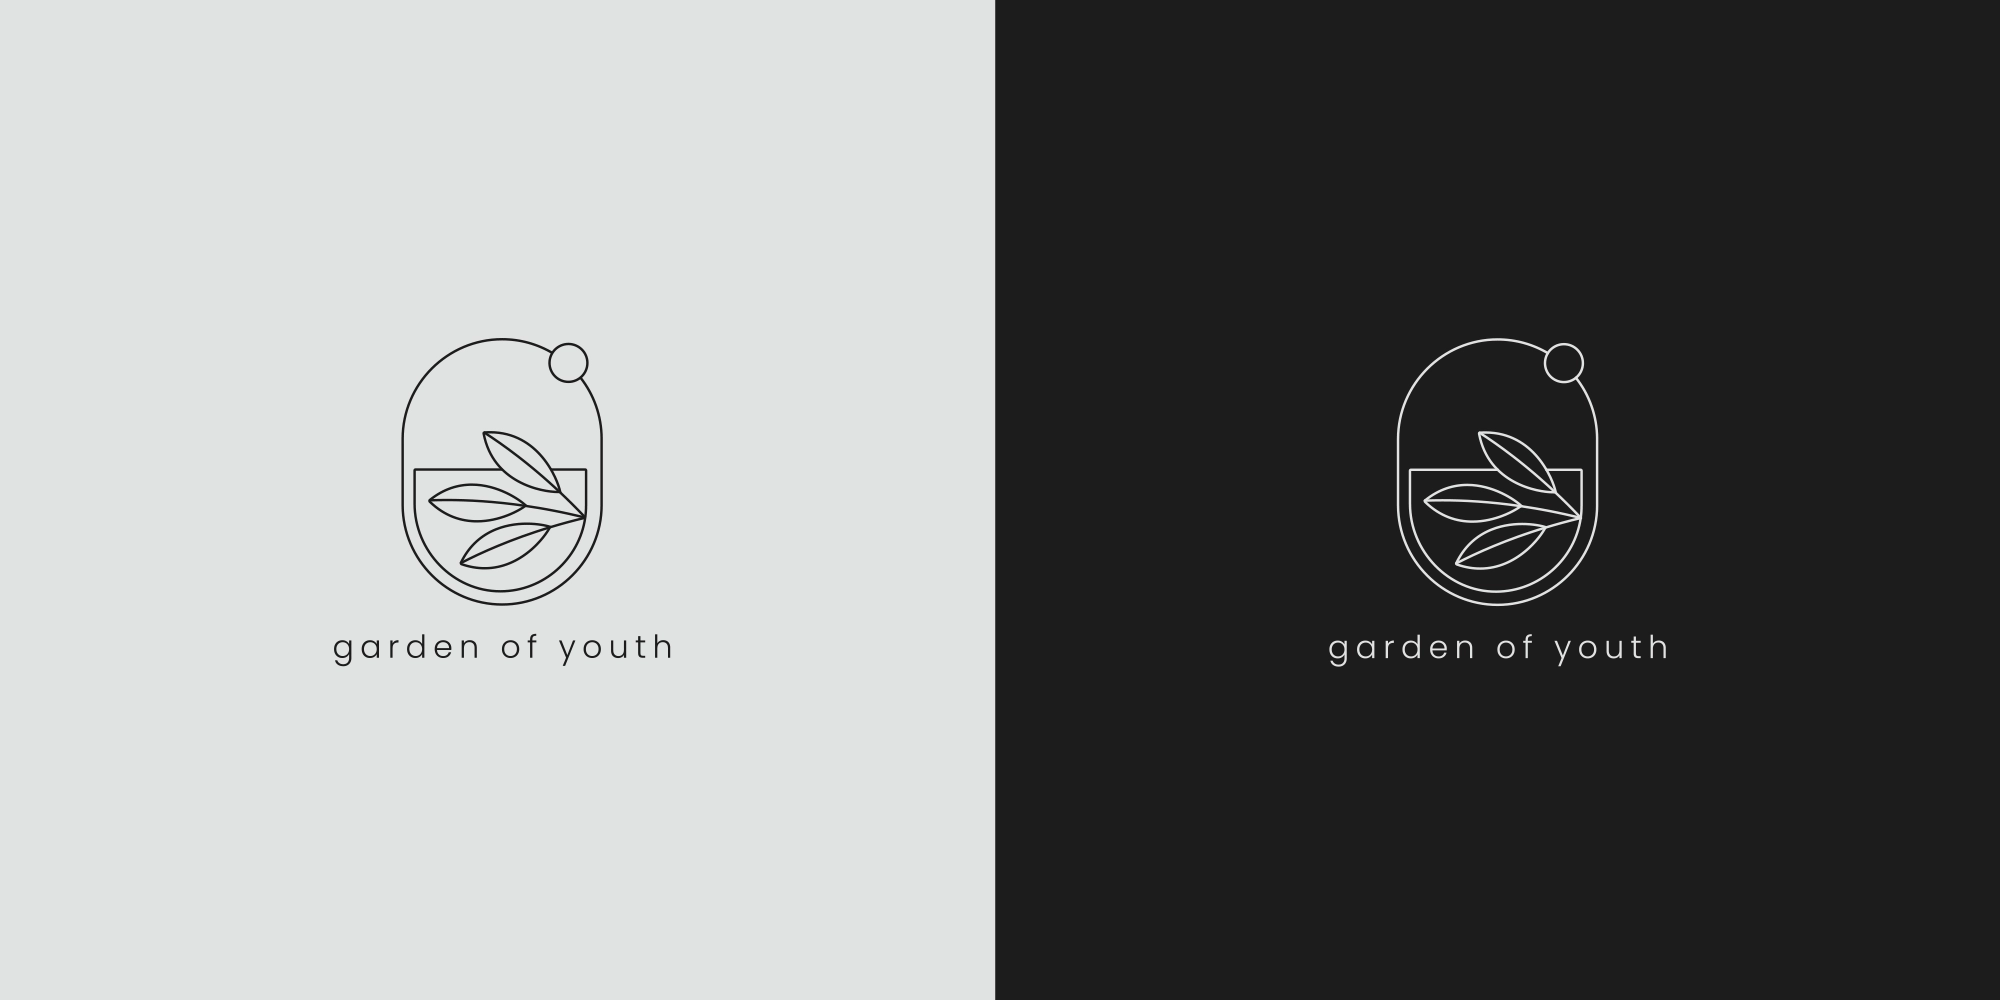 Garden of youth, logo design - black and white versions. Created by Milena Stanisavljevic, Web and Graphic Designer at miletart.com